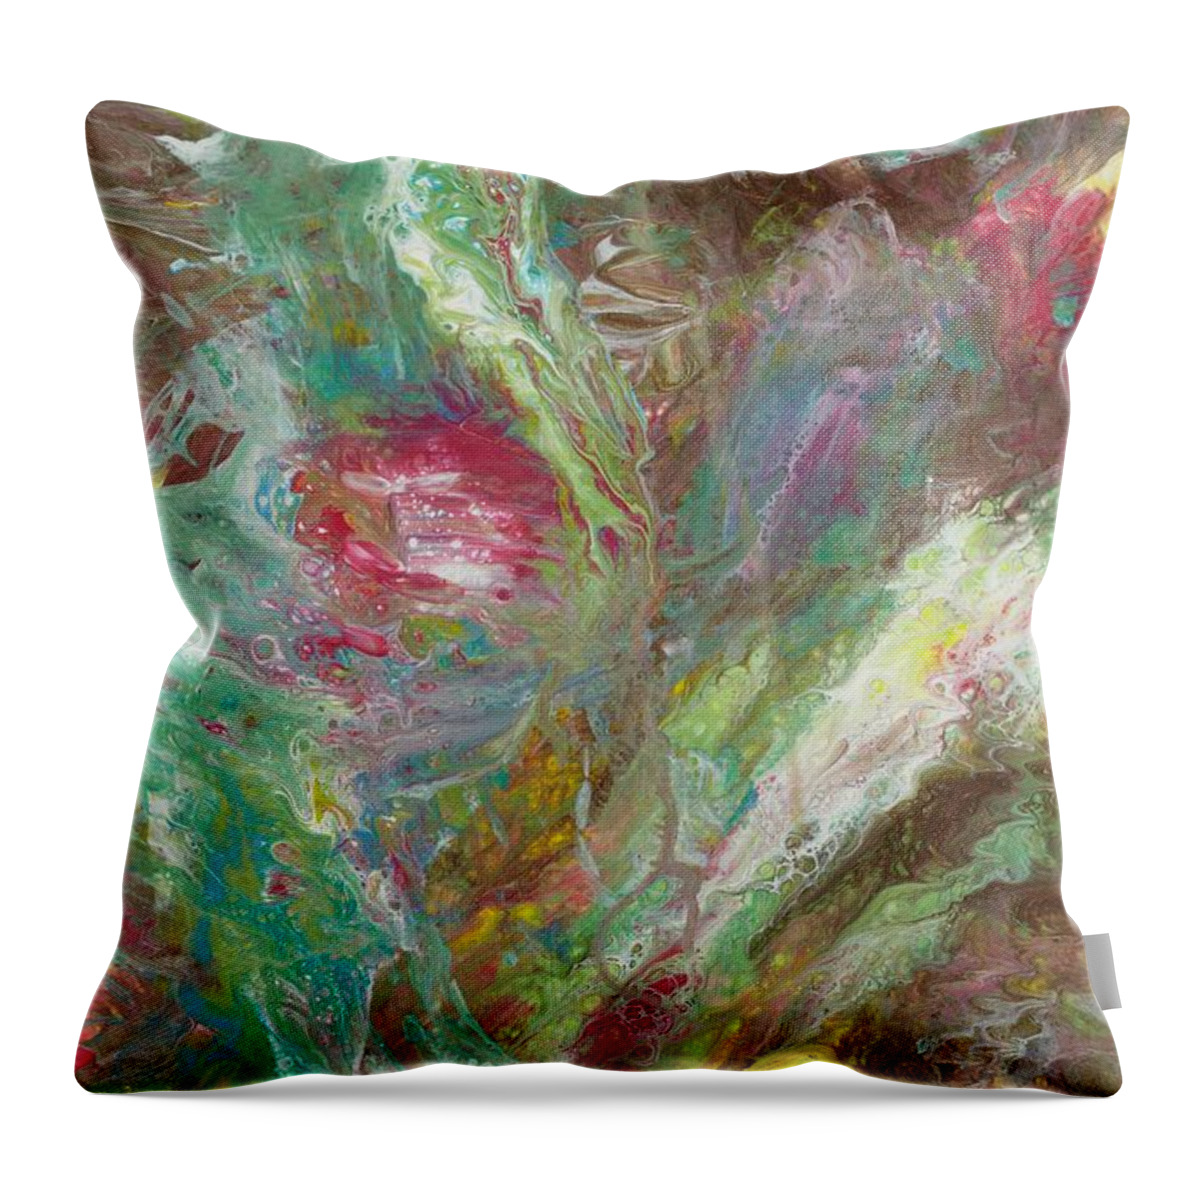 Water And Earth Throw Pillow featuring the painting Bloom by Tessa Evette